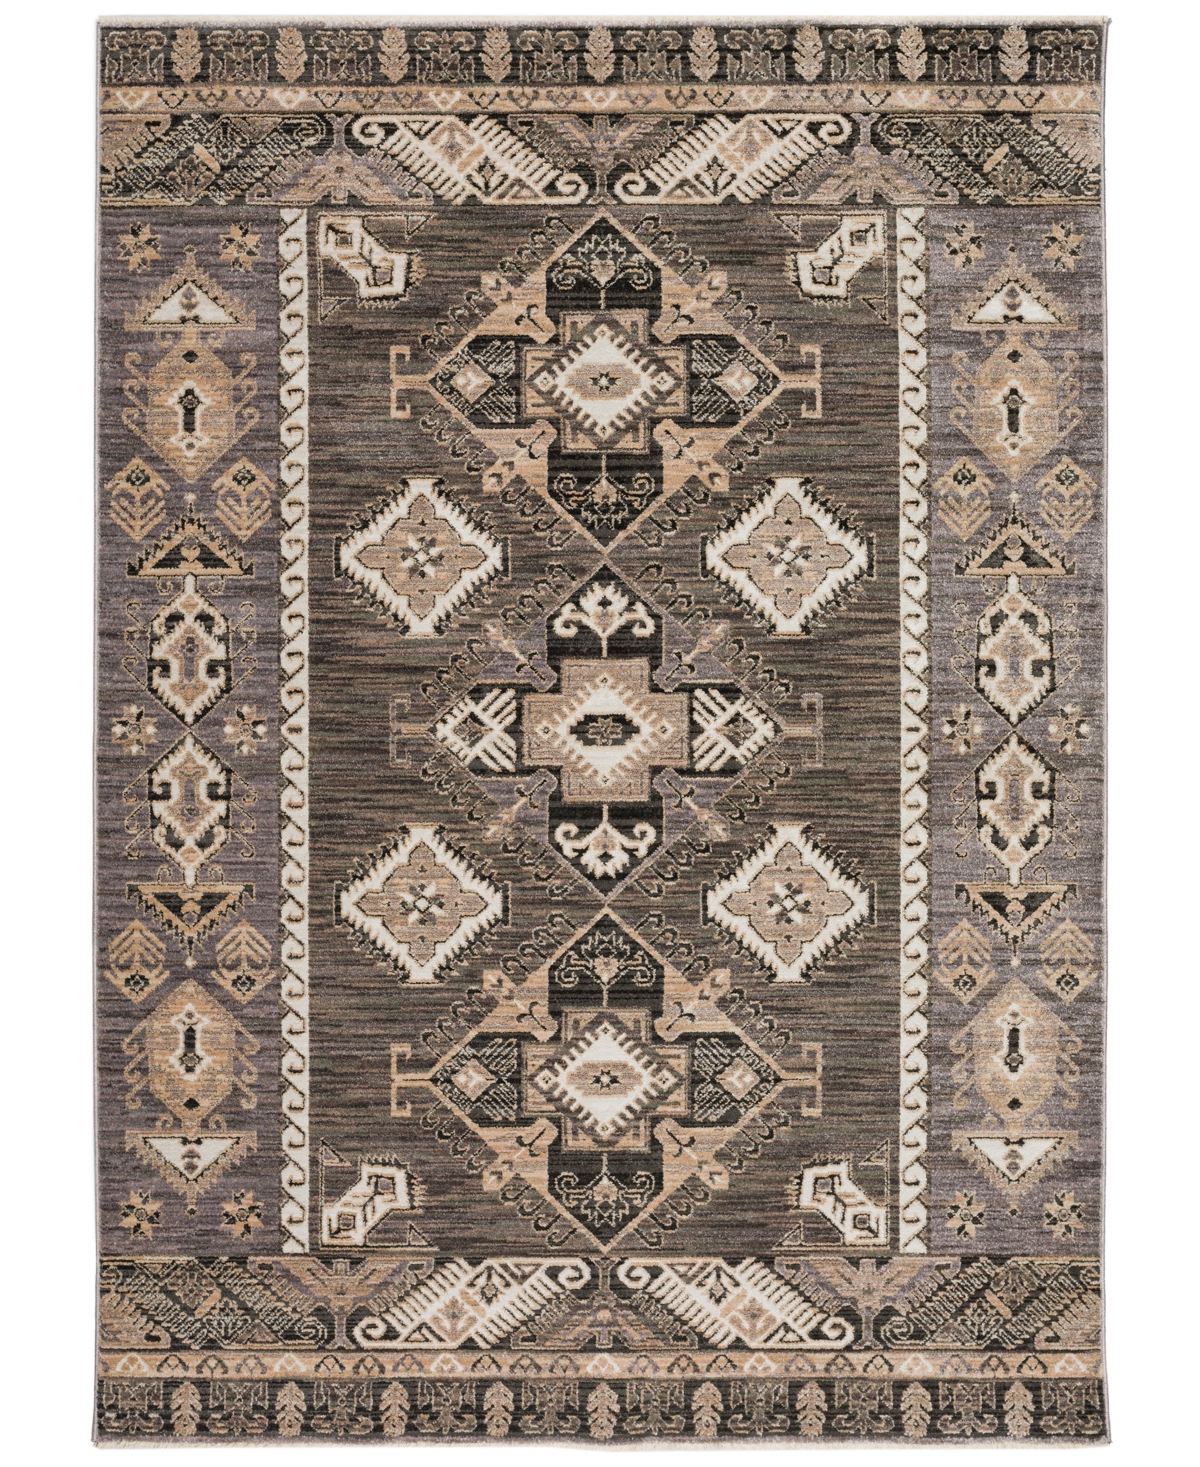 D Style Sergey Sgy10 3' X 5' Area Rug In Gray